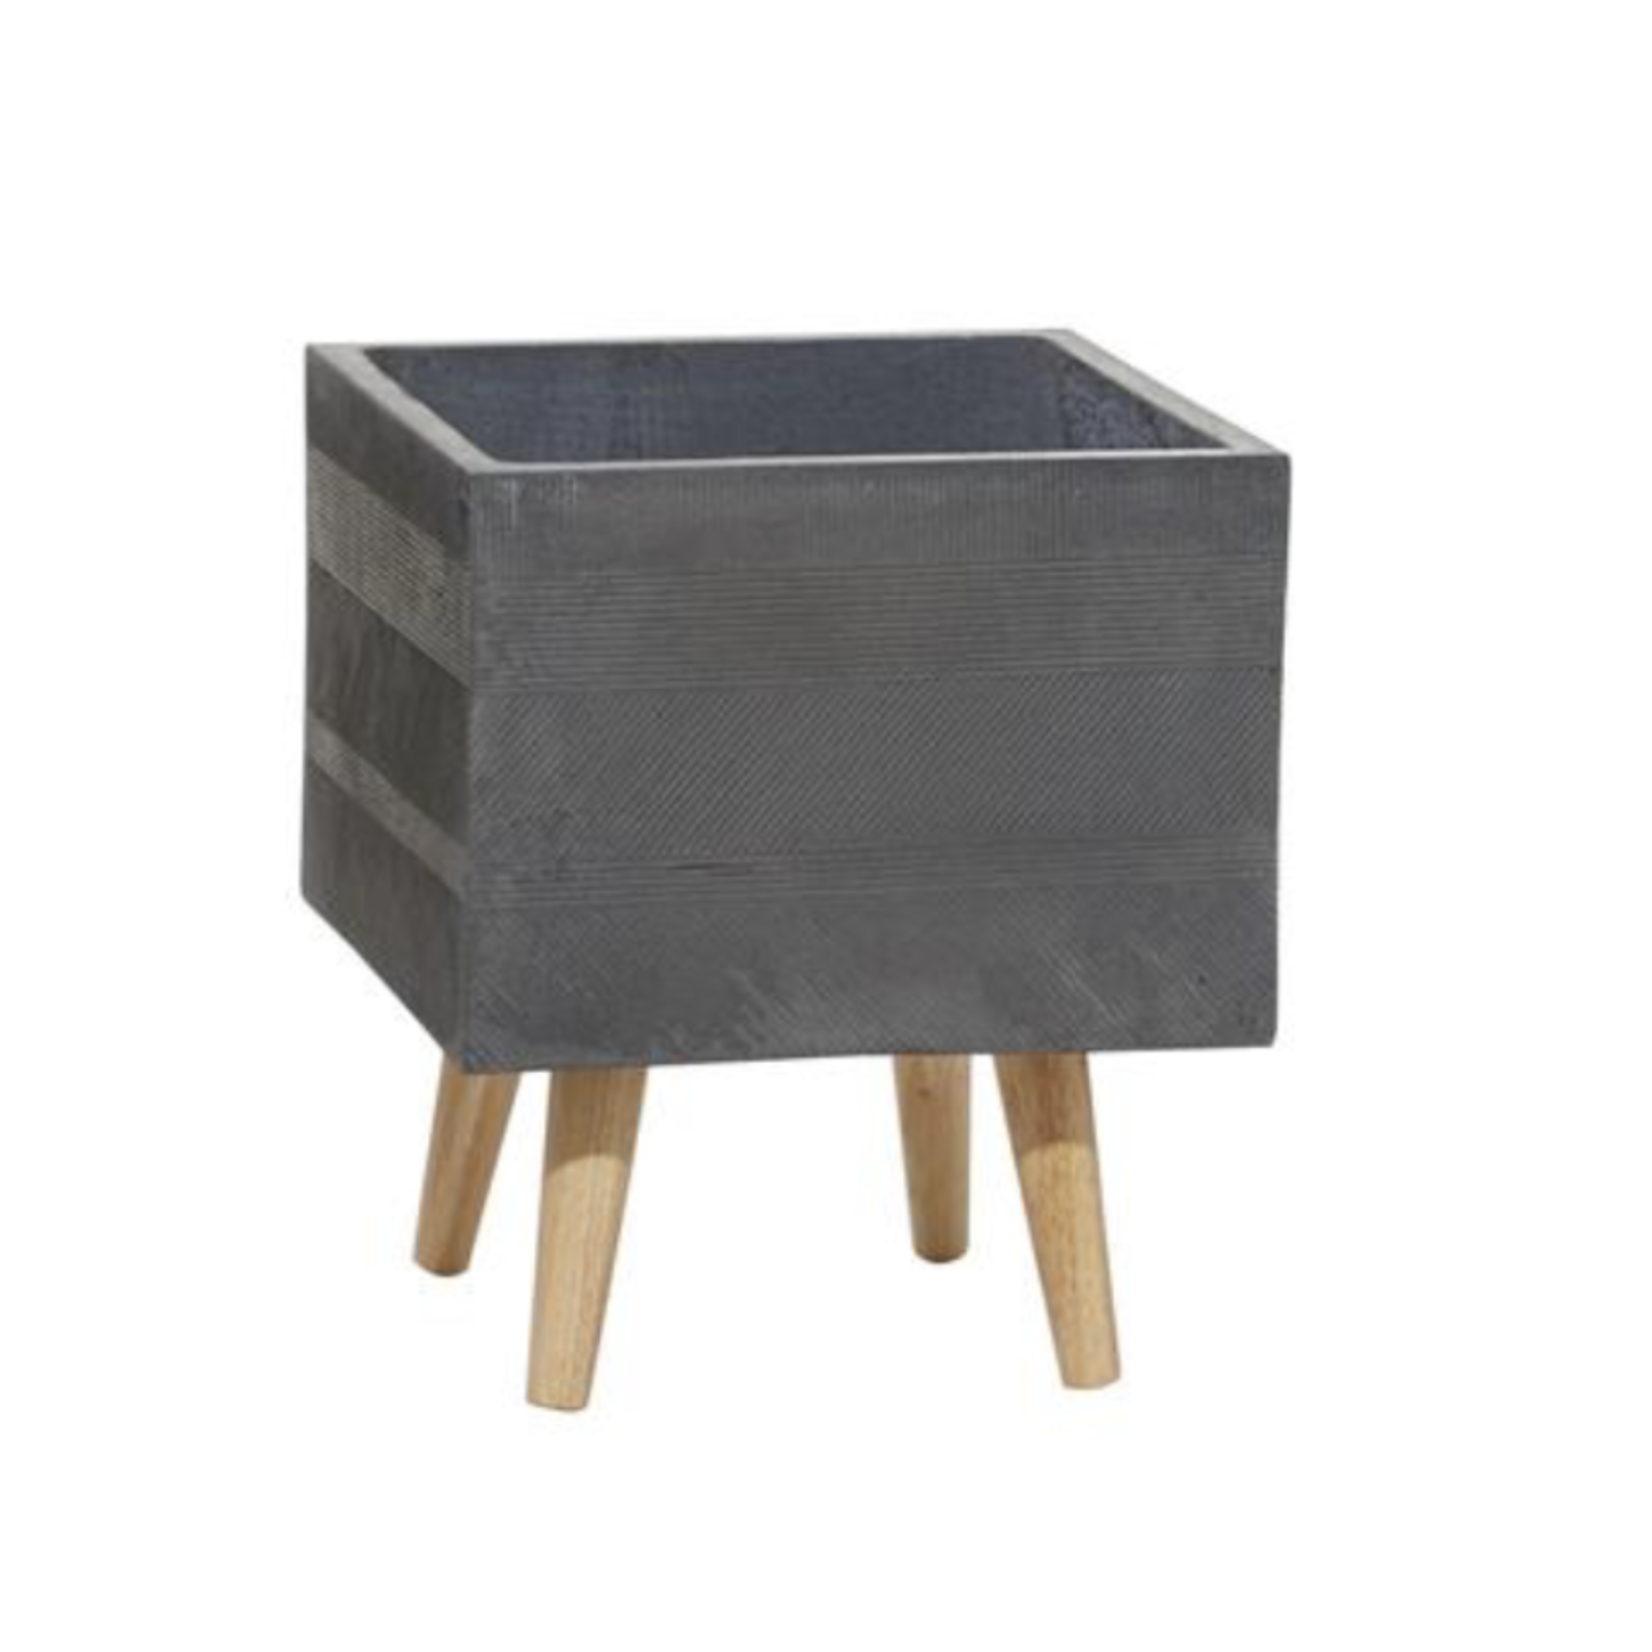 13”H X 11” X 11” SMALL SQUARE GREY POLYSTONE CONTEMPORARY PLANTER WITH WOOD STAND (NOT WATER TIGHT)